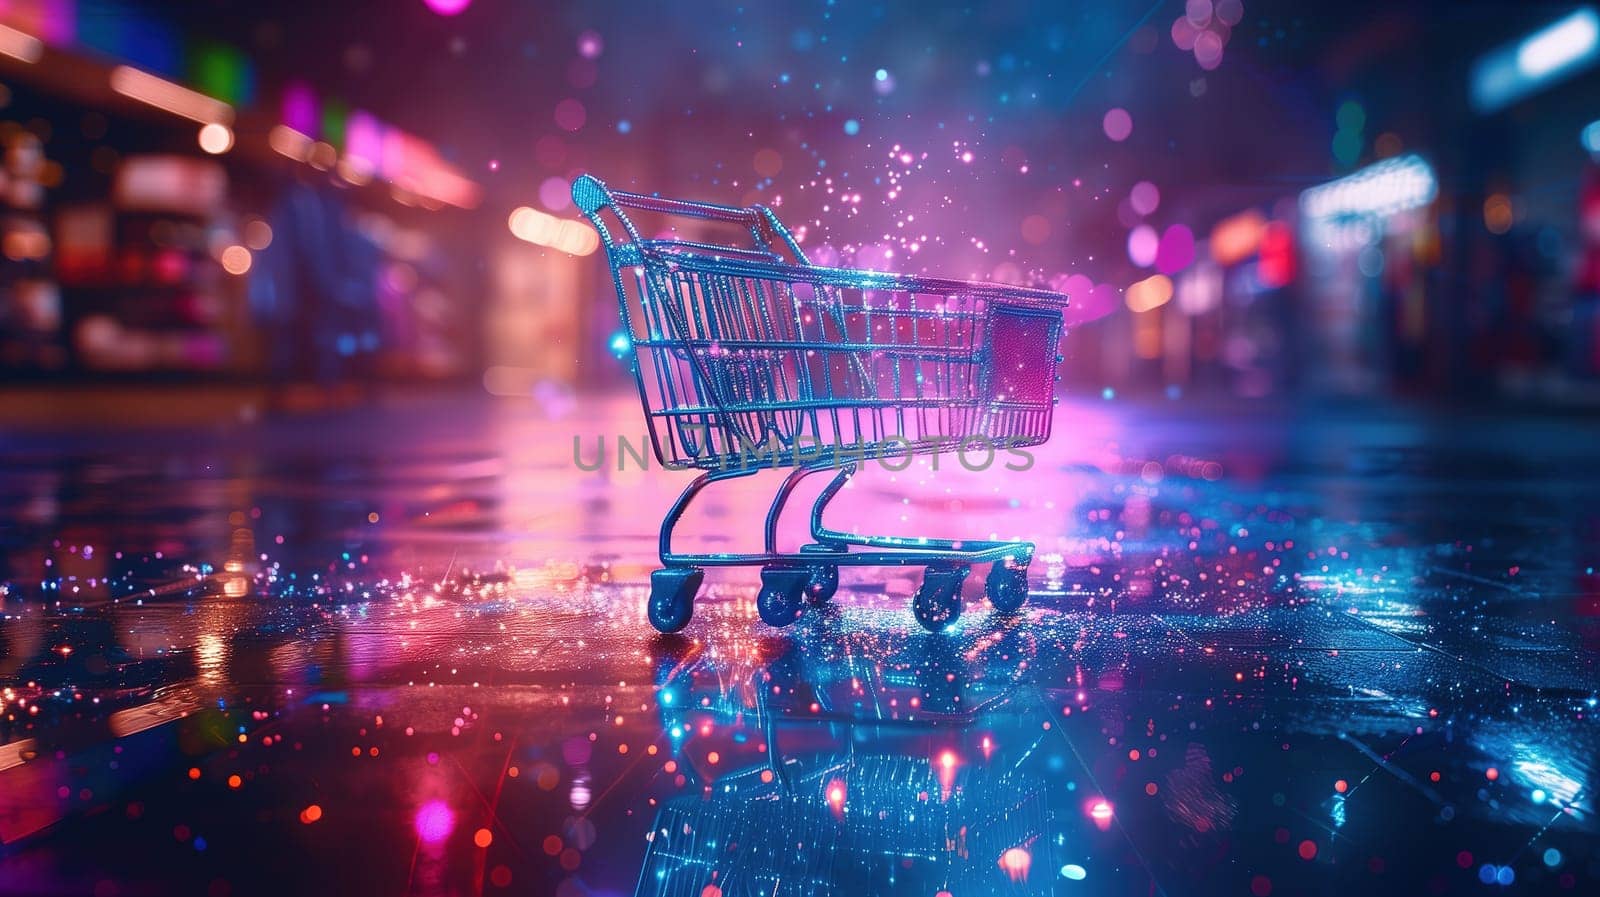 Abandoned Shopping Cart in Rain by TRMK